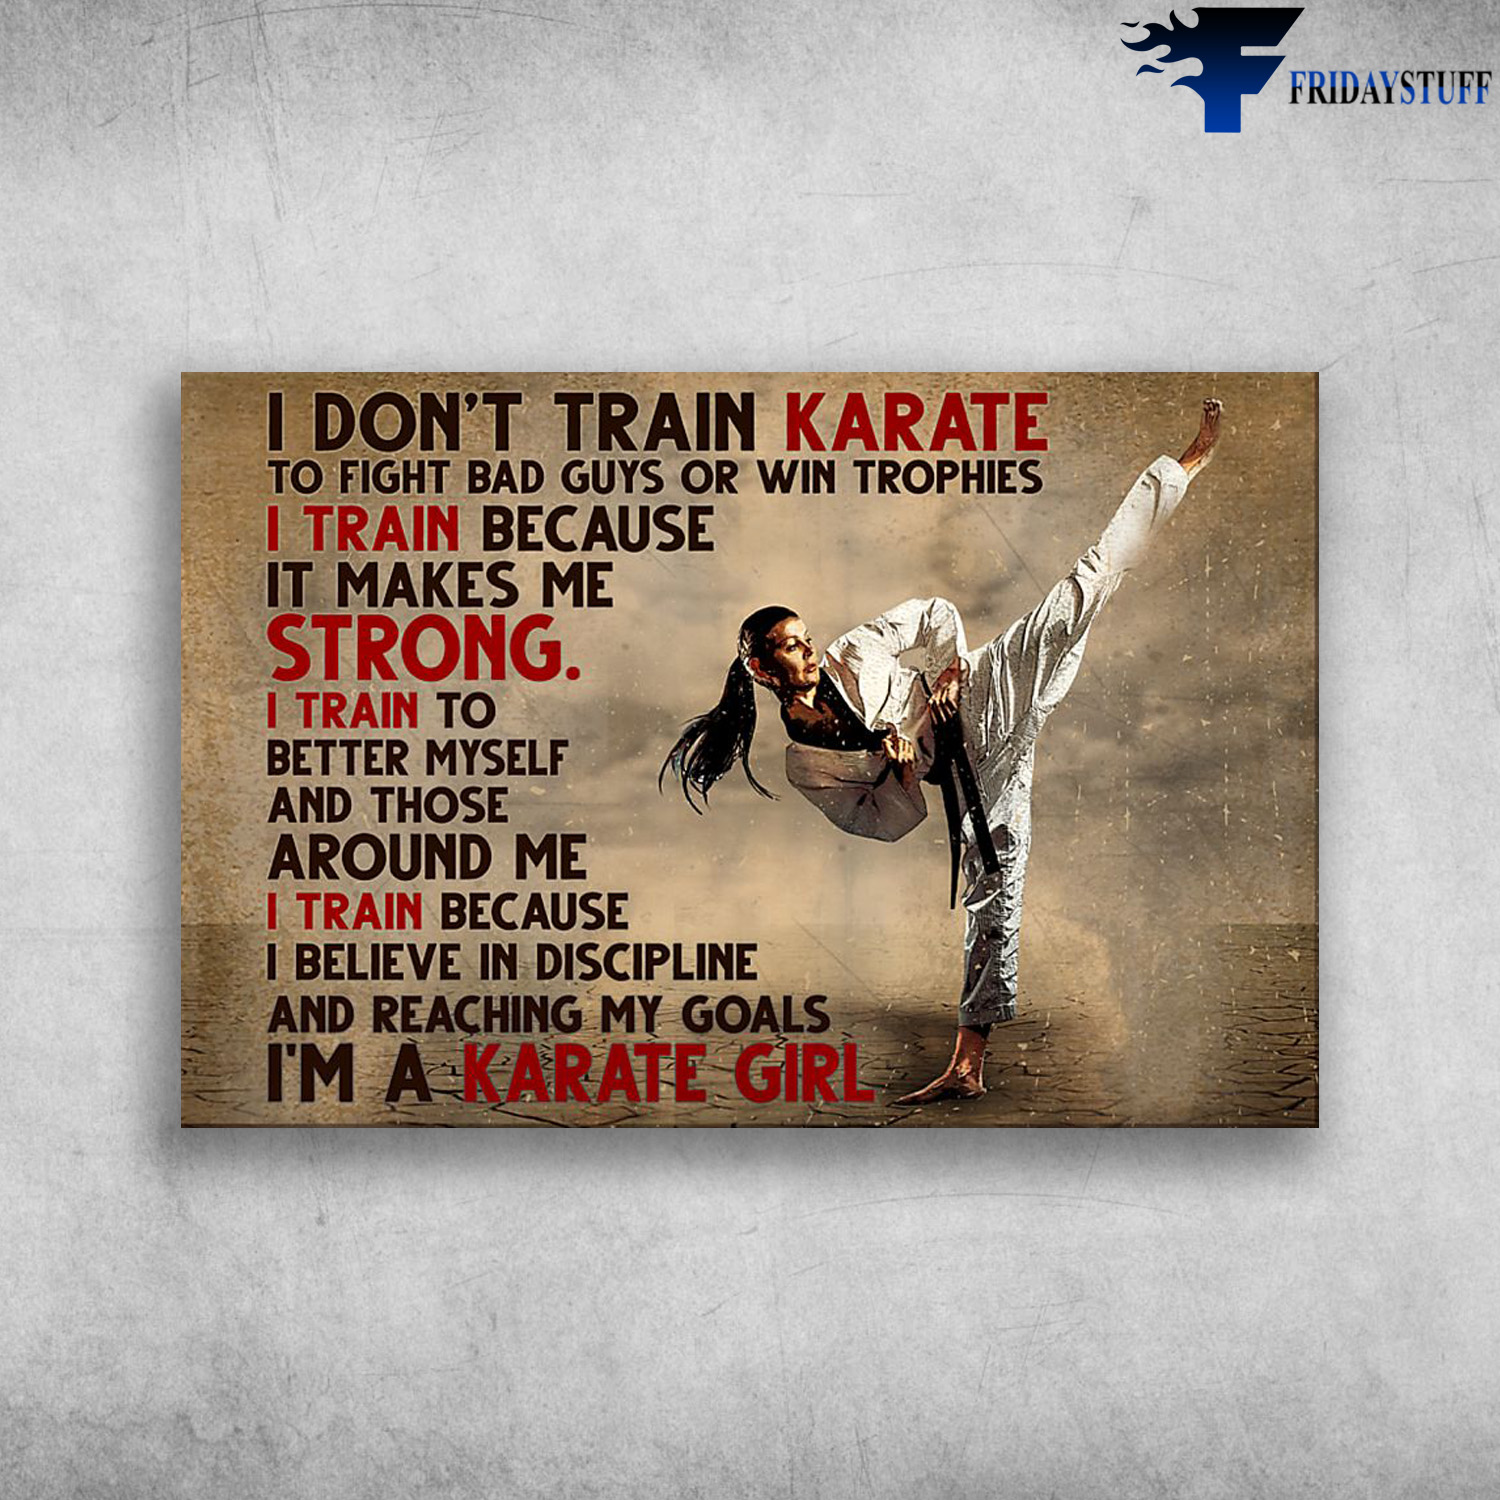 Karate Girl - I Don't Train Karate To Fight Bad Guys Or Win Trophies, I Train Because It Makes Me Strong, I Train To Better Myself And Those Around Me, I Train Because, I Believe In Discipline, And Reaching My Goals, I'm A Karate Girl